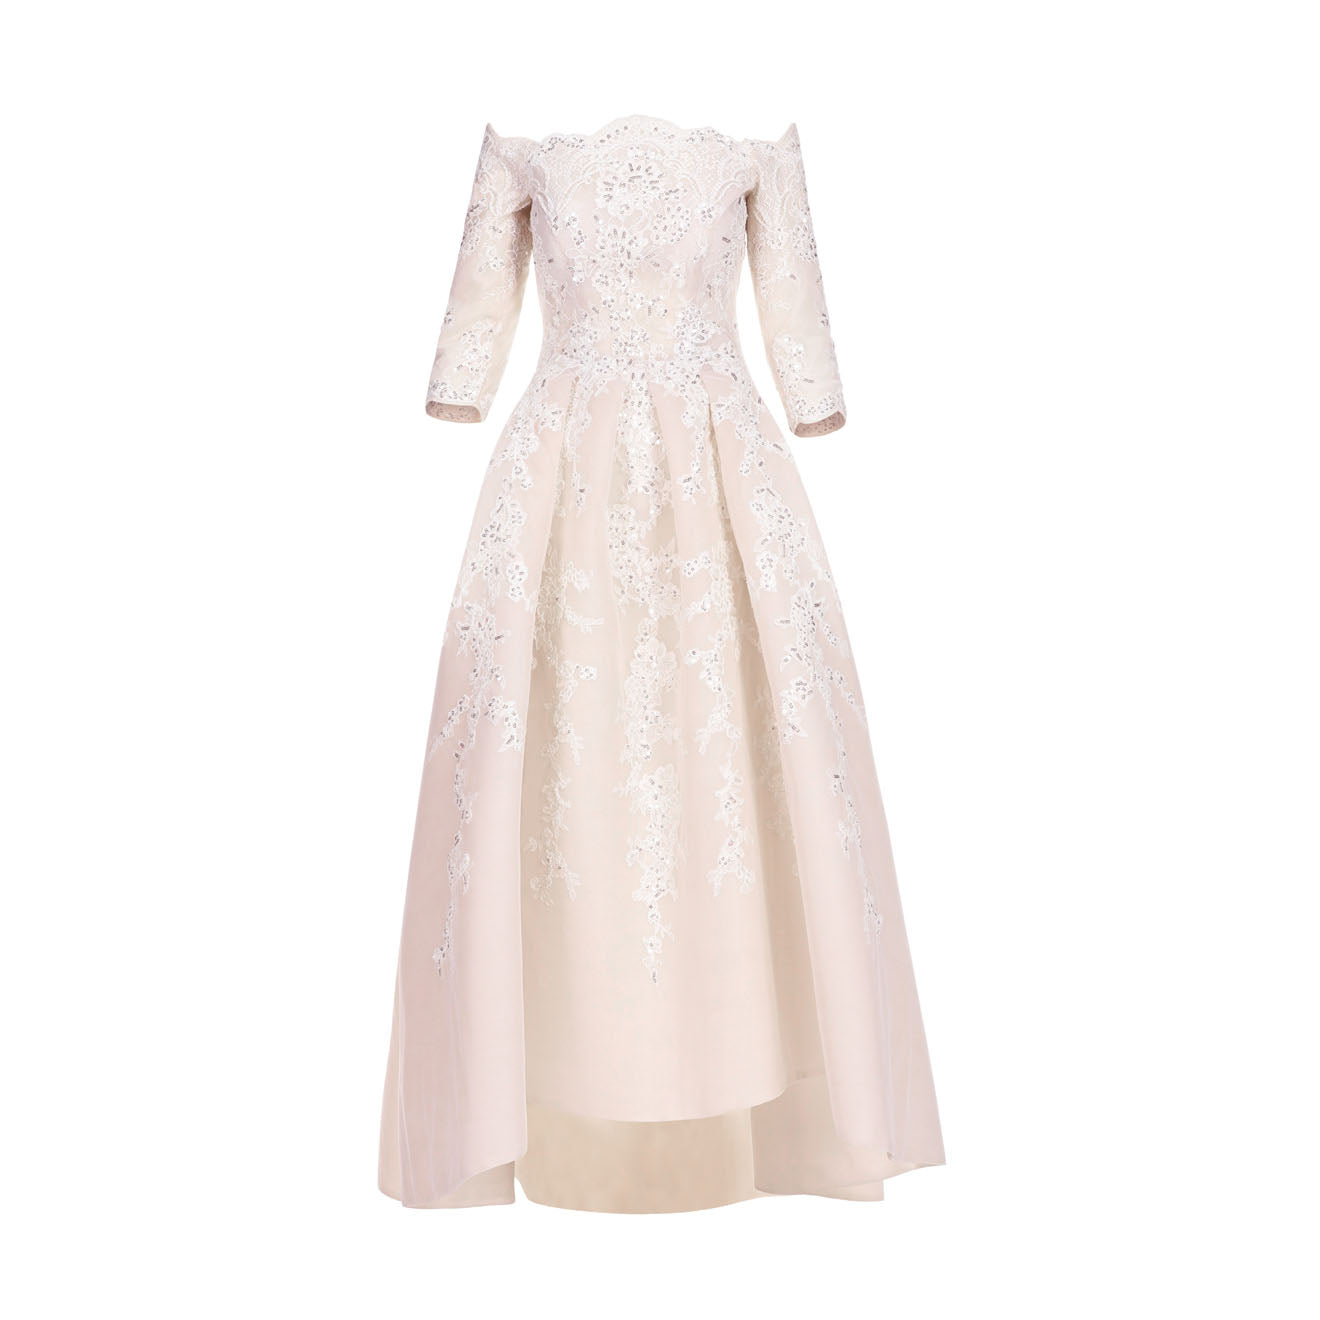 Fully embroidered box-pleated wedding dress with intricate lace